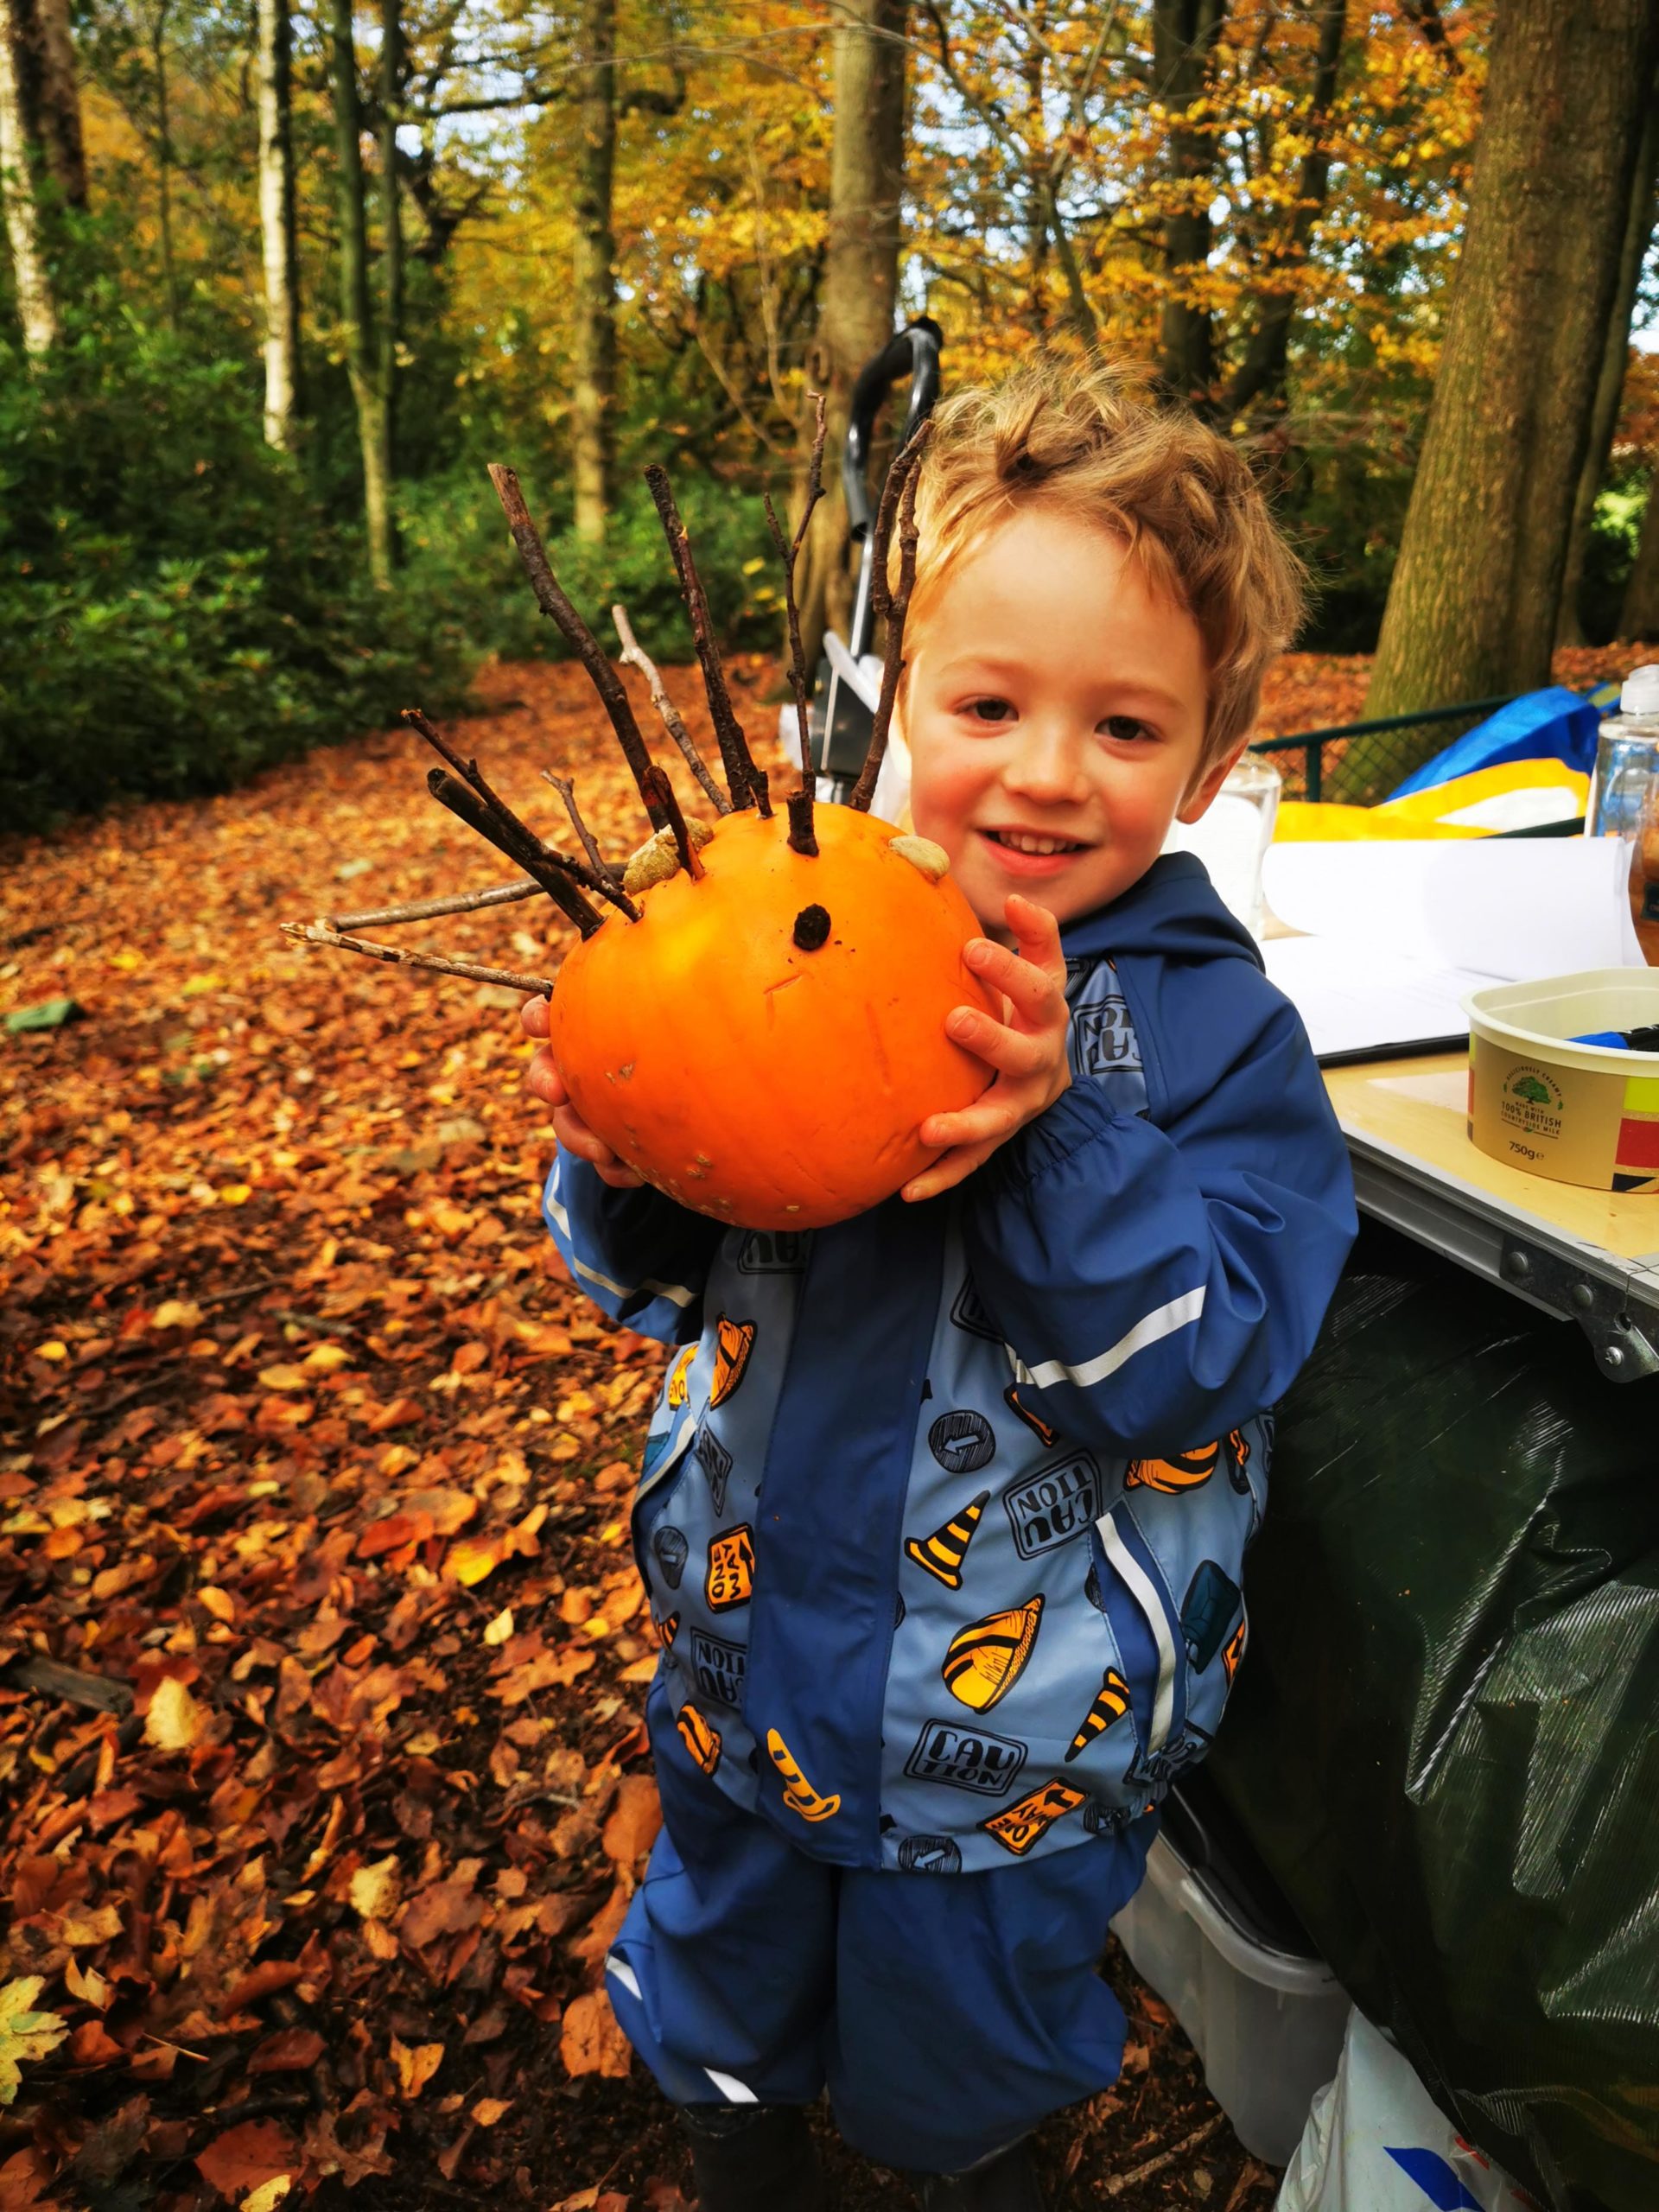 a child holds up a pumpkin in a forest.